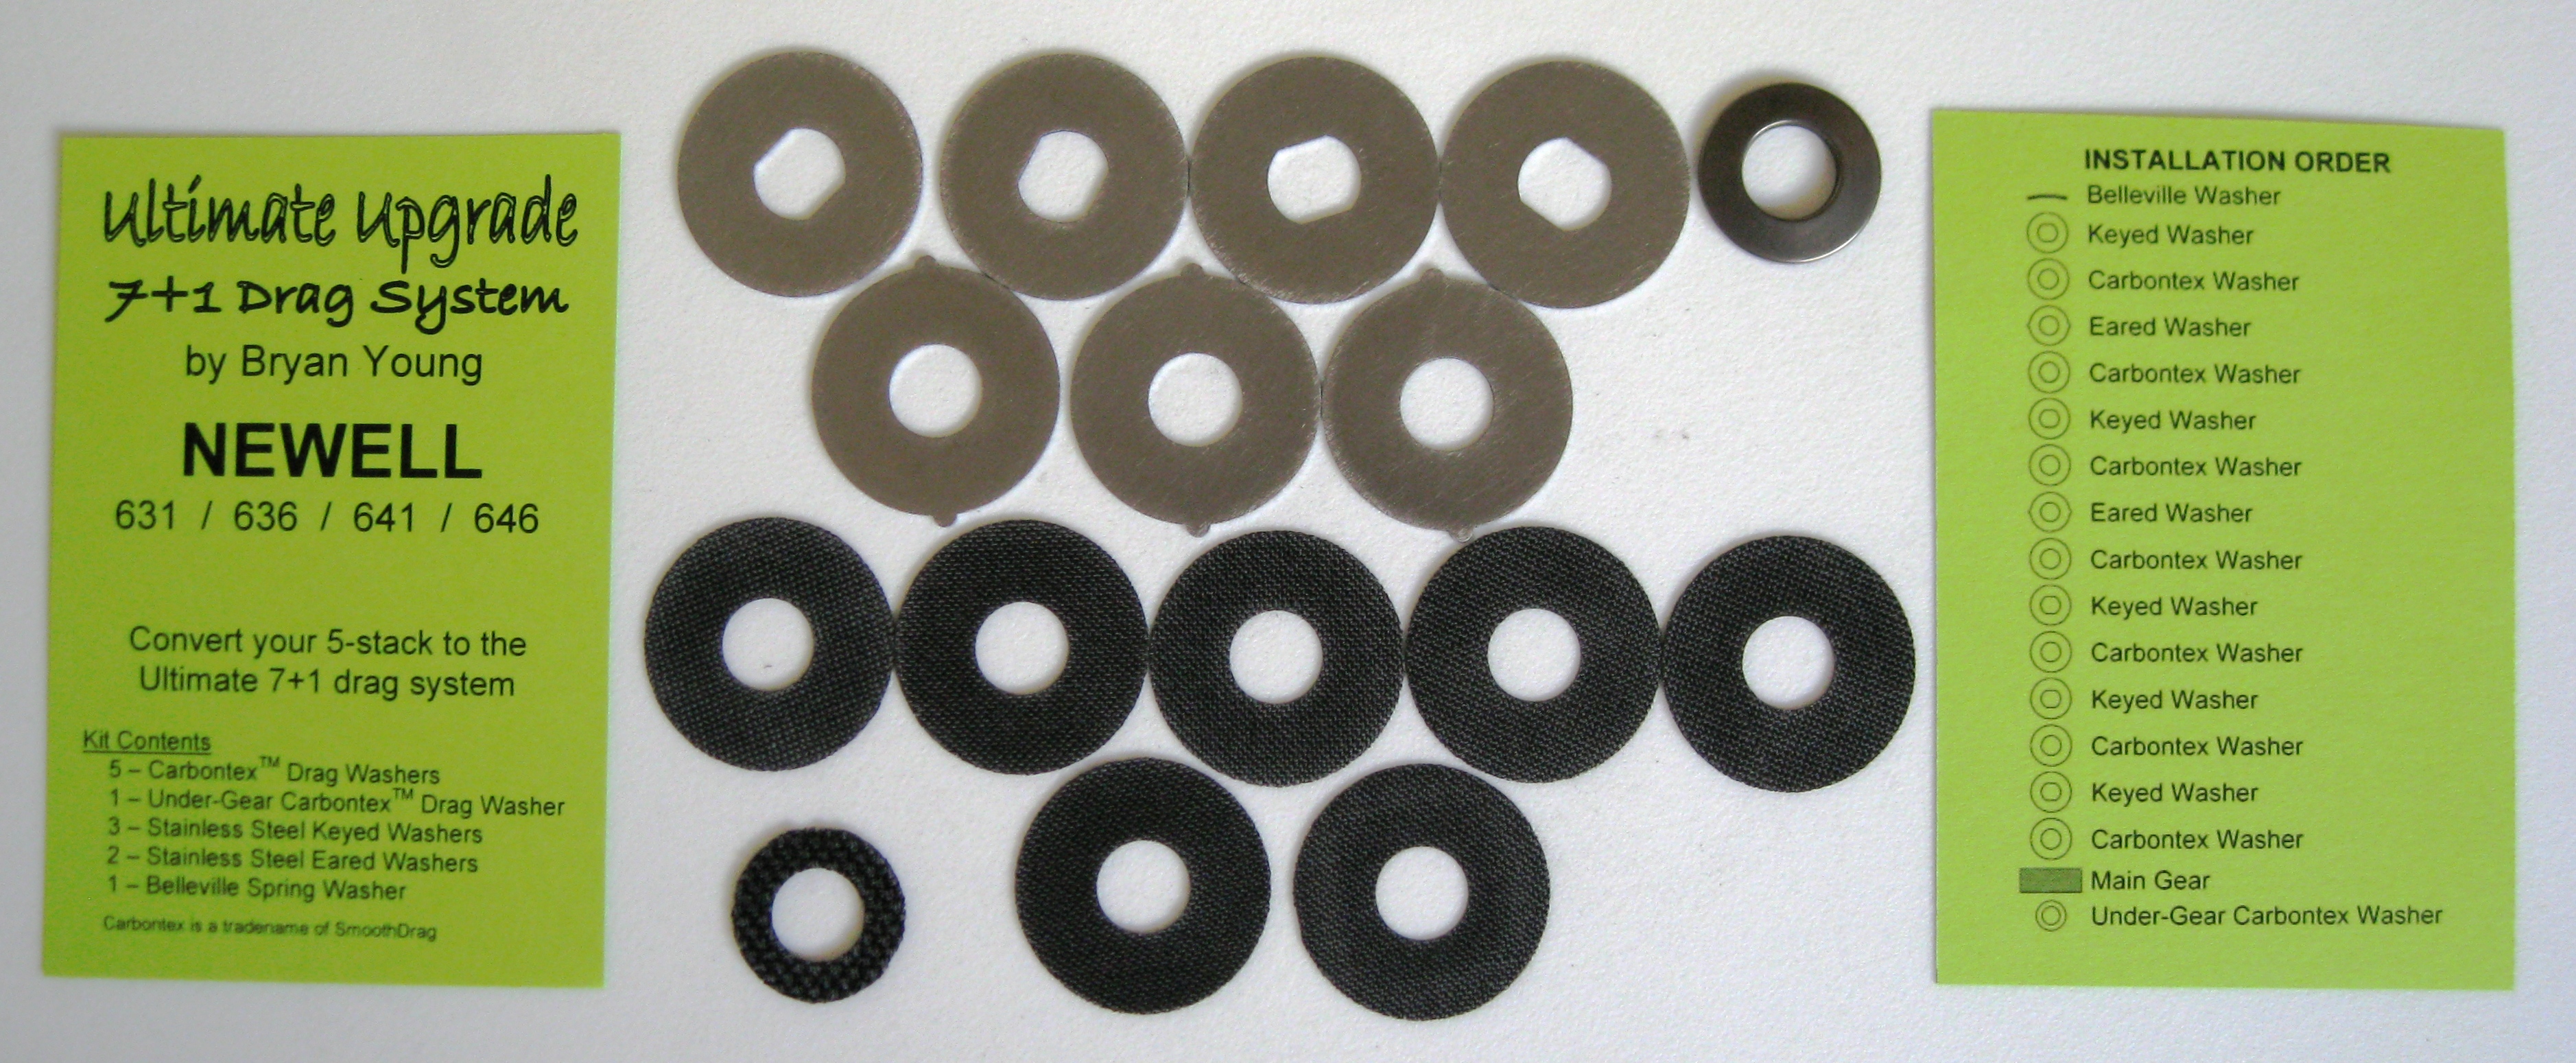 NEWELL REEL PART 550 3.2 - (4) Smooth Drag Carbontex Drag Washers #SDN1